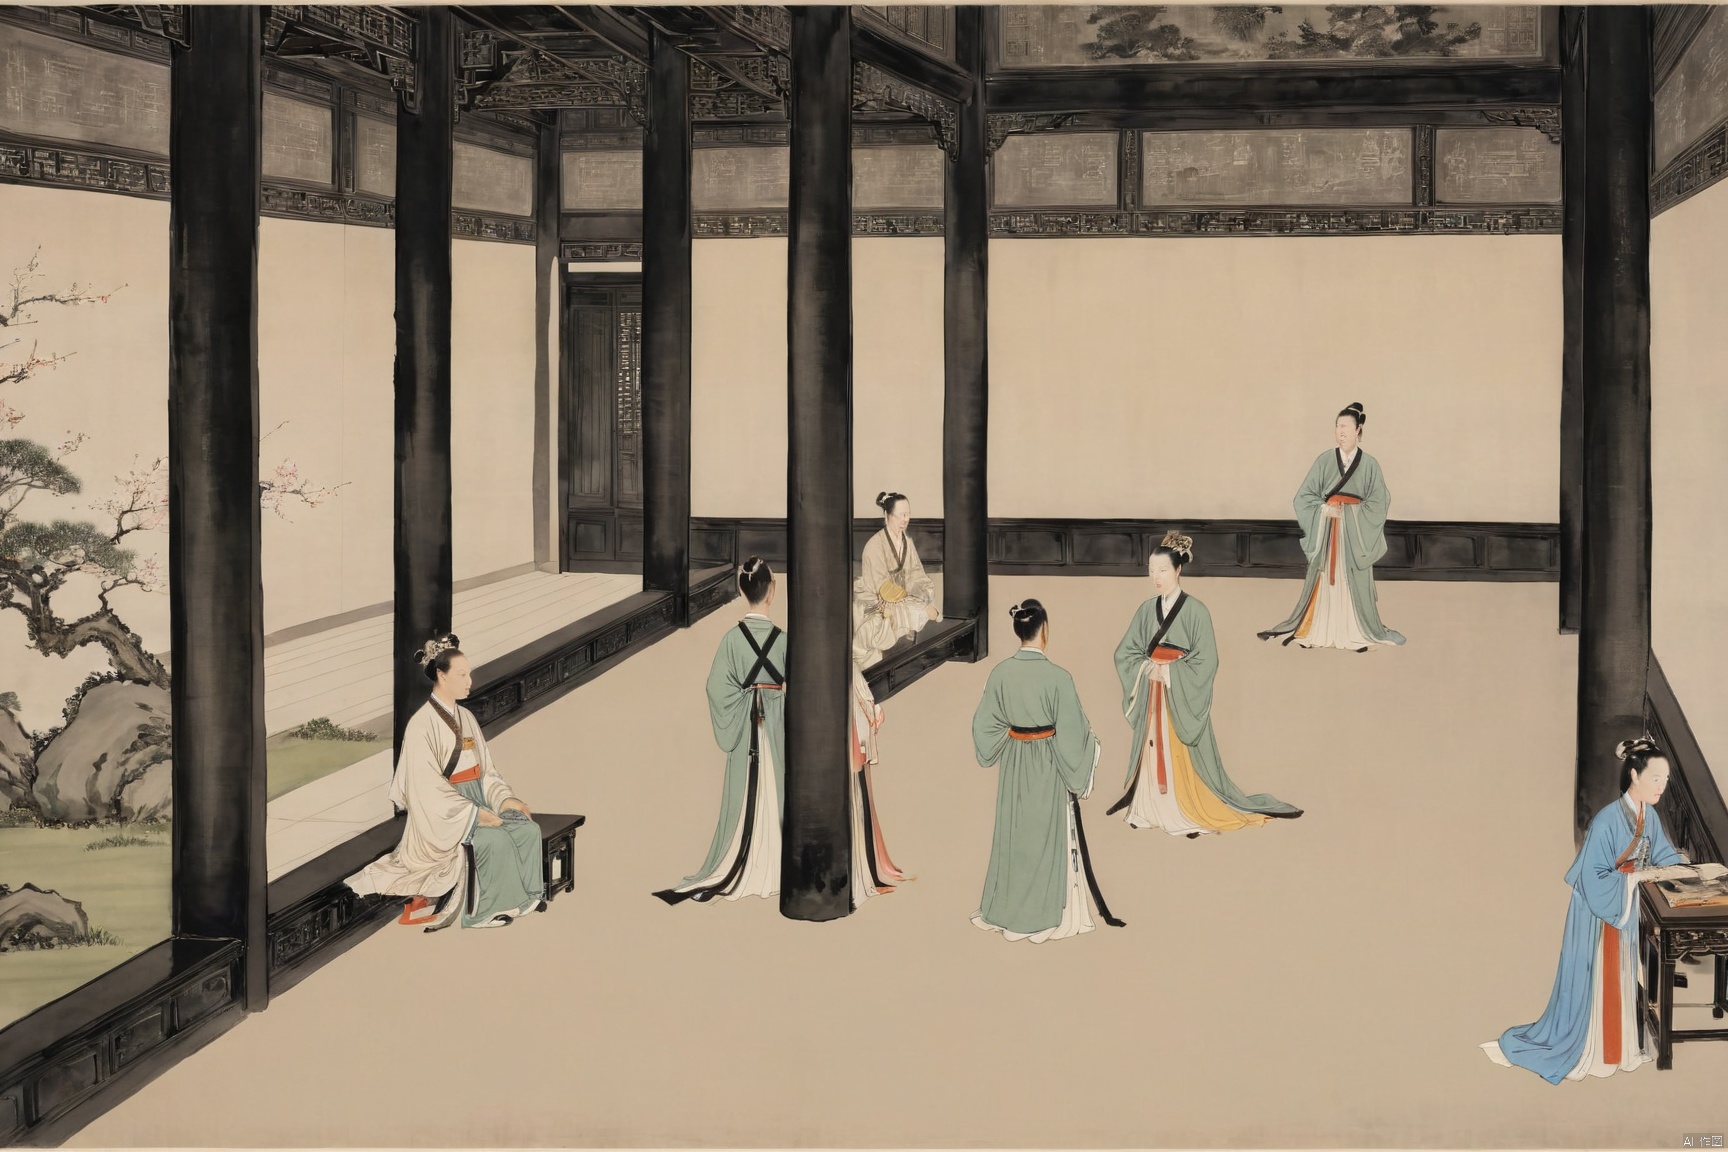 traditional chinese inkpainting,blackandwhiteinkpainting,the imperial palace, a hall of power, exudes its grandeur not only through its monumental architecture but also in the demeanor and atmosphere of the people within. The palace maids, dressed in splendid attire, glide gracefully along the corridors paved with green stone, their movements elegant and cautious, as if each step resonates with the heartbeat of history. The court officials, clad in their ceremonial robes, faces solemn, move through the towering palace walls and the resplendent halls, each bow a solemn act of reverence. The emperor, the sovereign of the nation, sits on his throne, his majesty as imposing as the palace itself, commanding respect and awe. Here, every breath is filled with ceremony, every glance exchanged brimming with veneration., traditional chinese ink painting